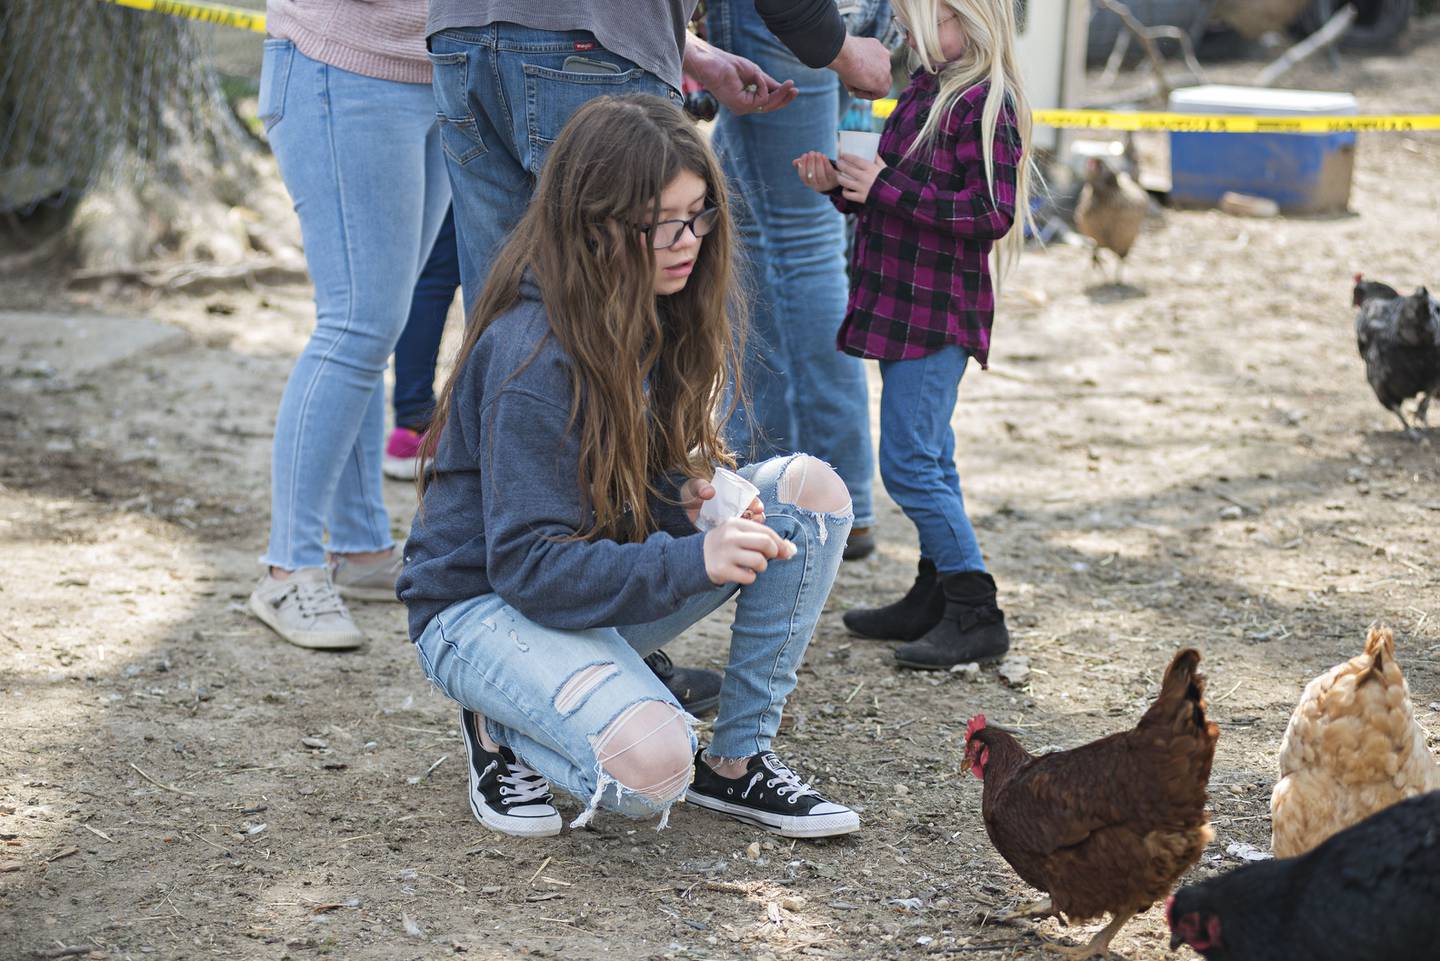 Cherikee Serenil, 12, crouches down to feed a chicken while visiting the farm with her family Saturday.